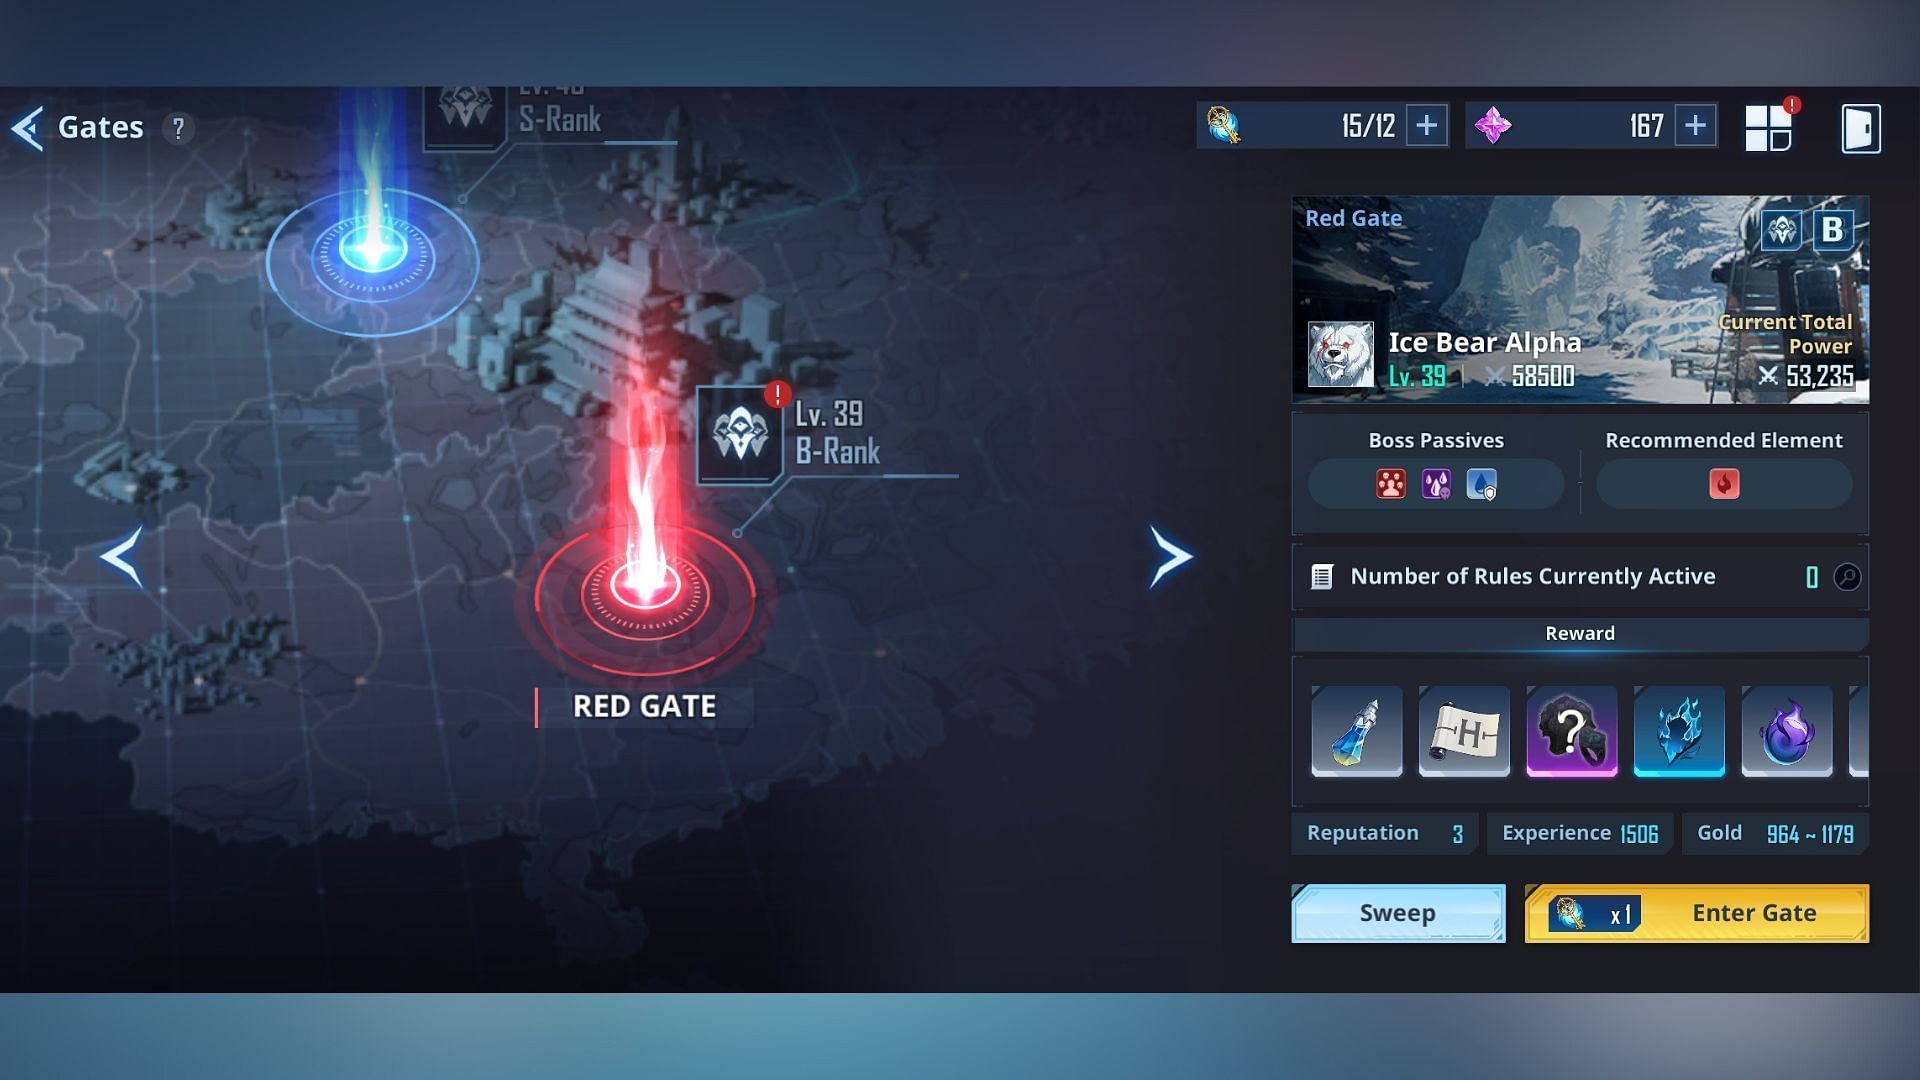 You must spend one gate key to enter a dungeon (Image via Netmarble)